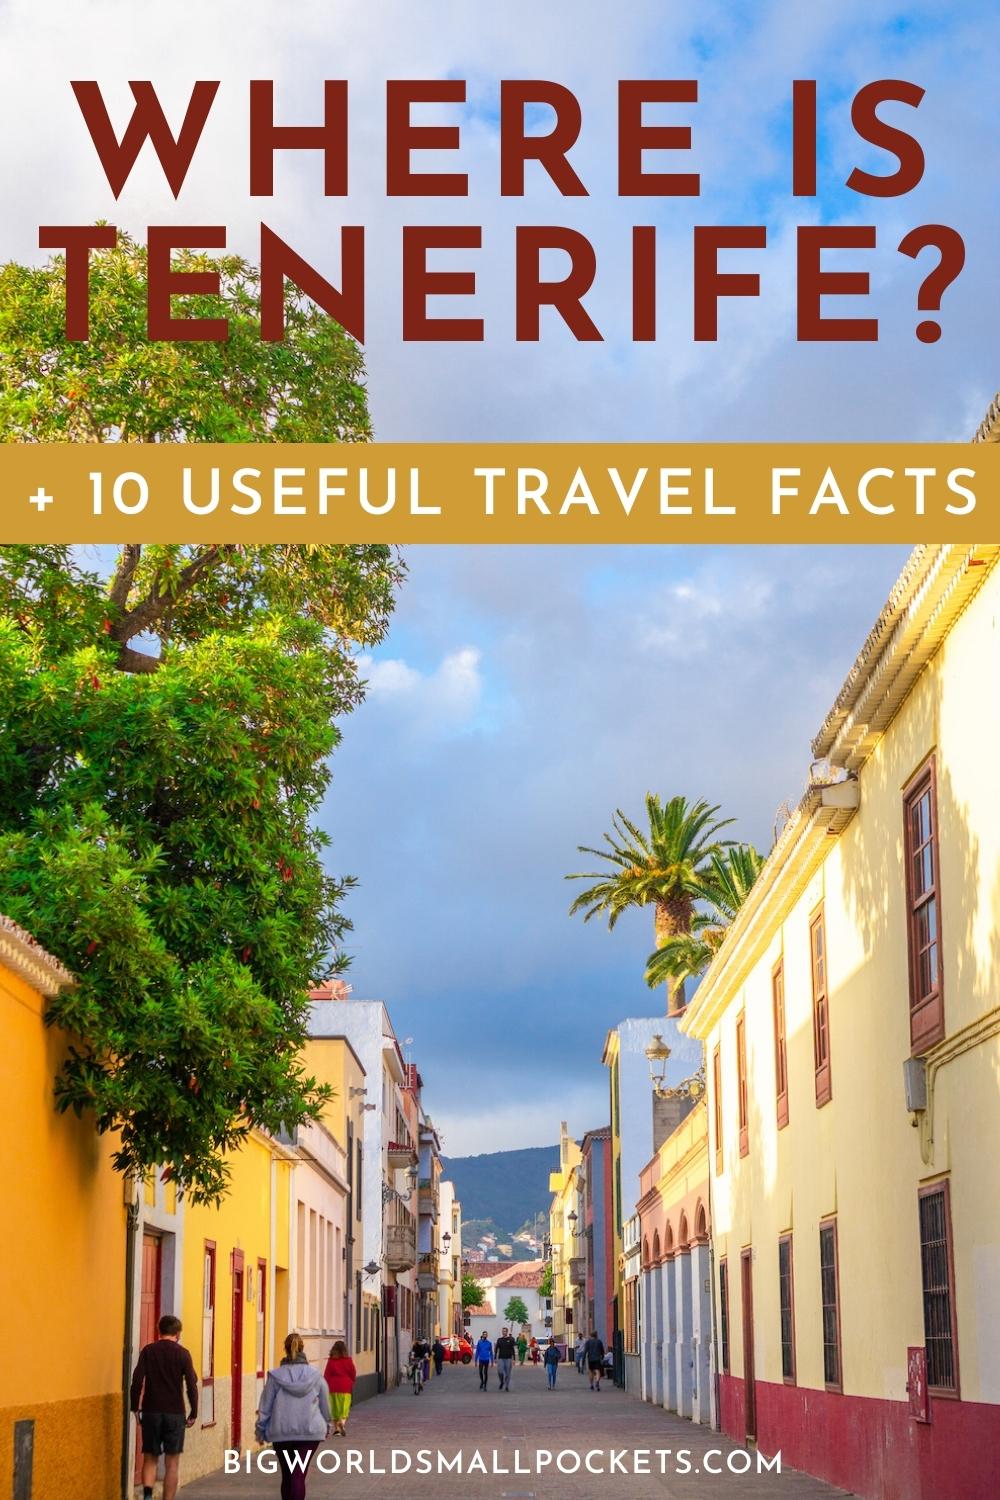 Where is Tenerife + 10 Useful Facts for Travel There